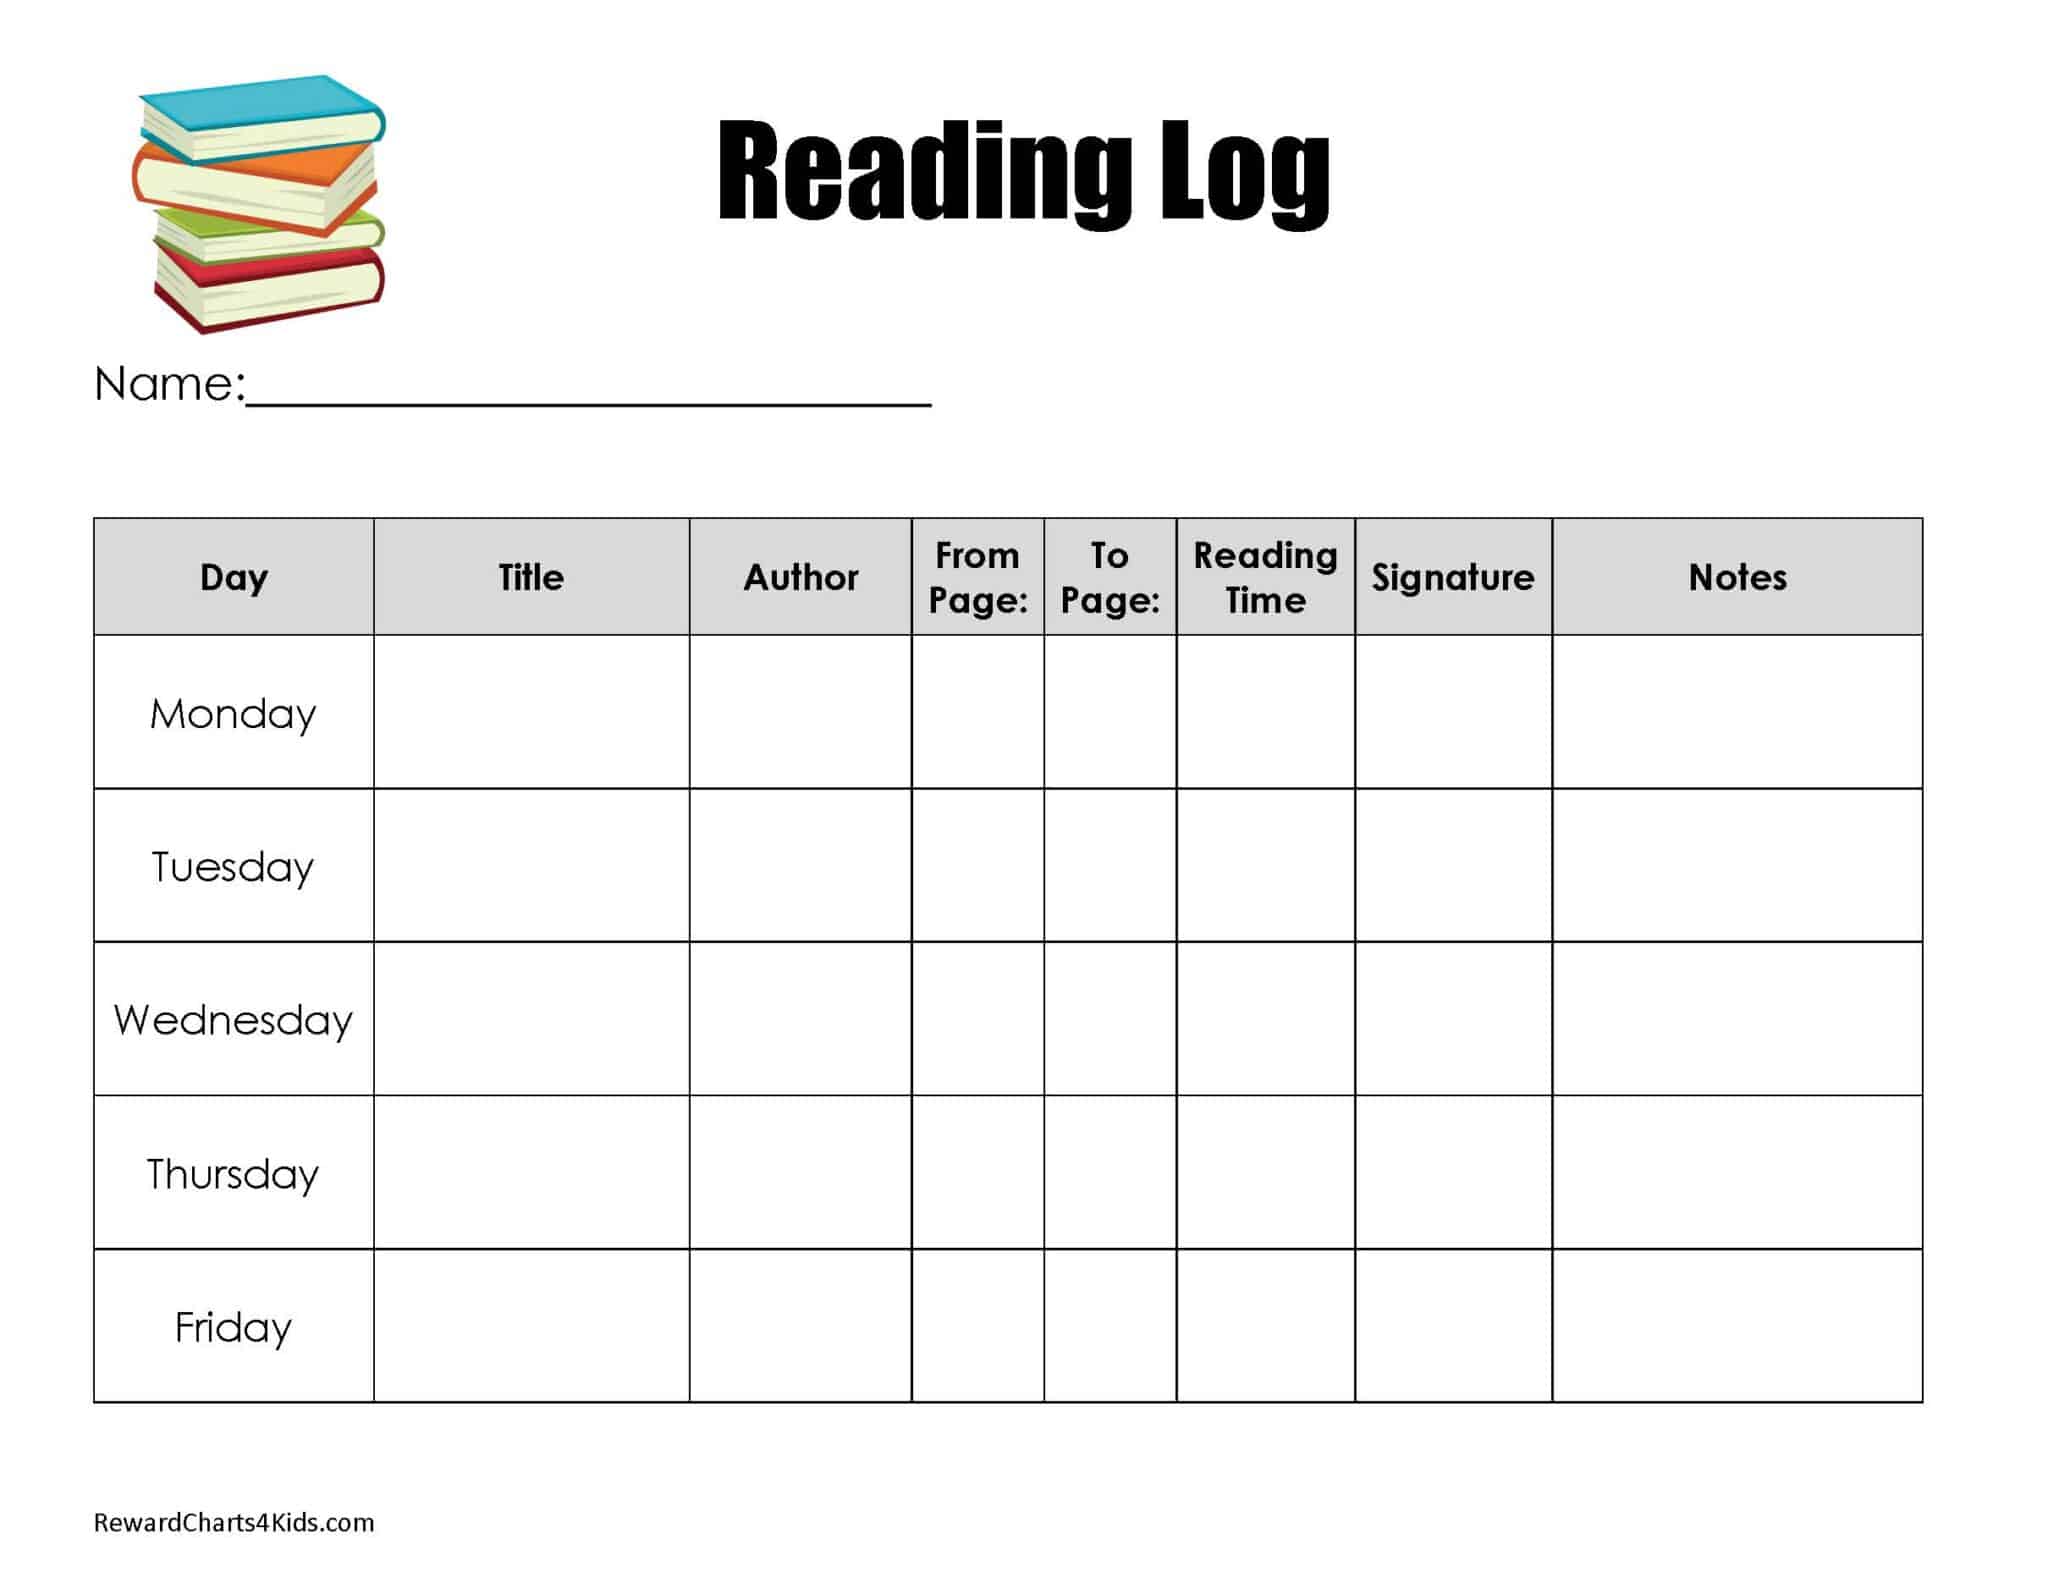 Reading Log Printable Excel Template